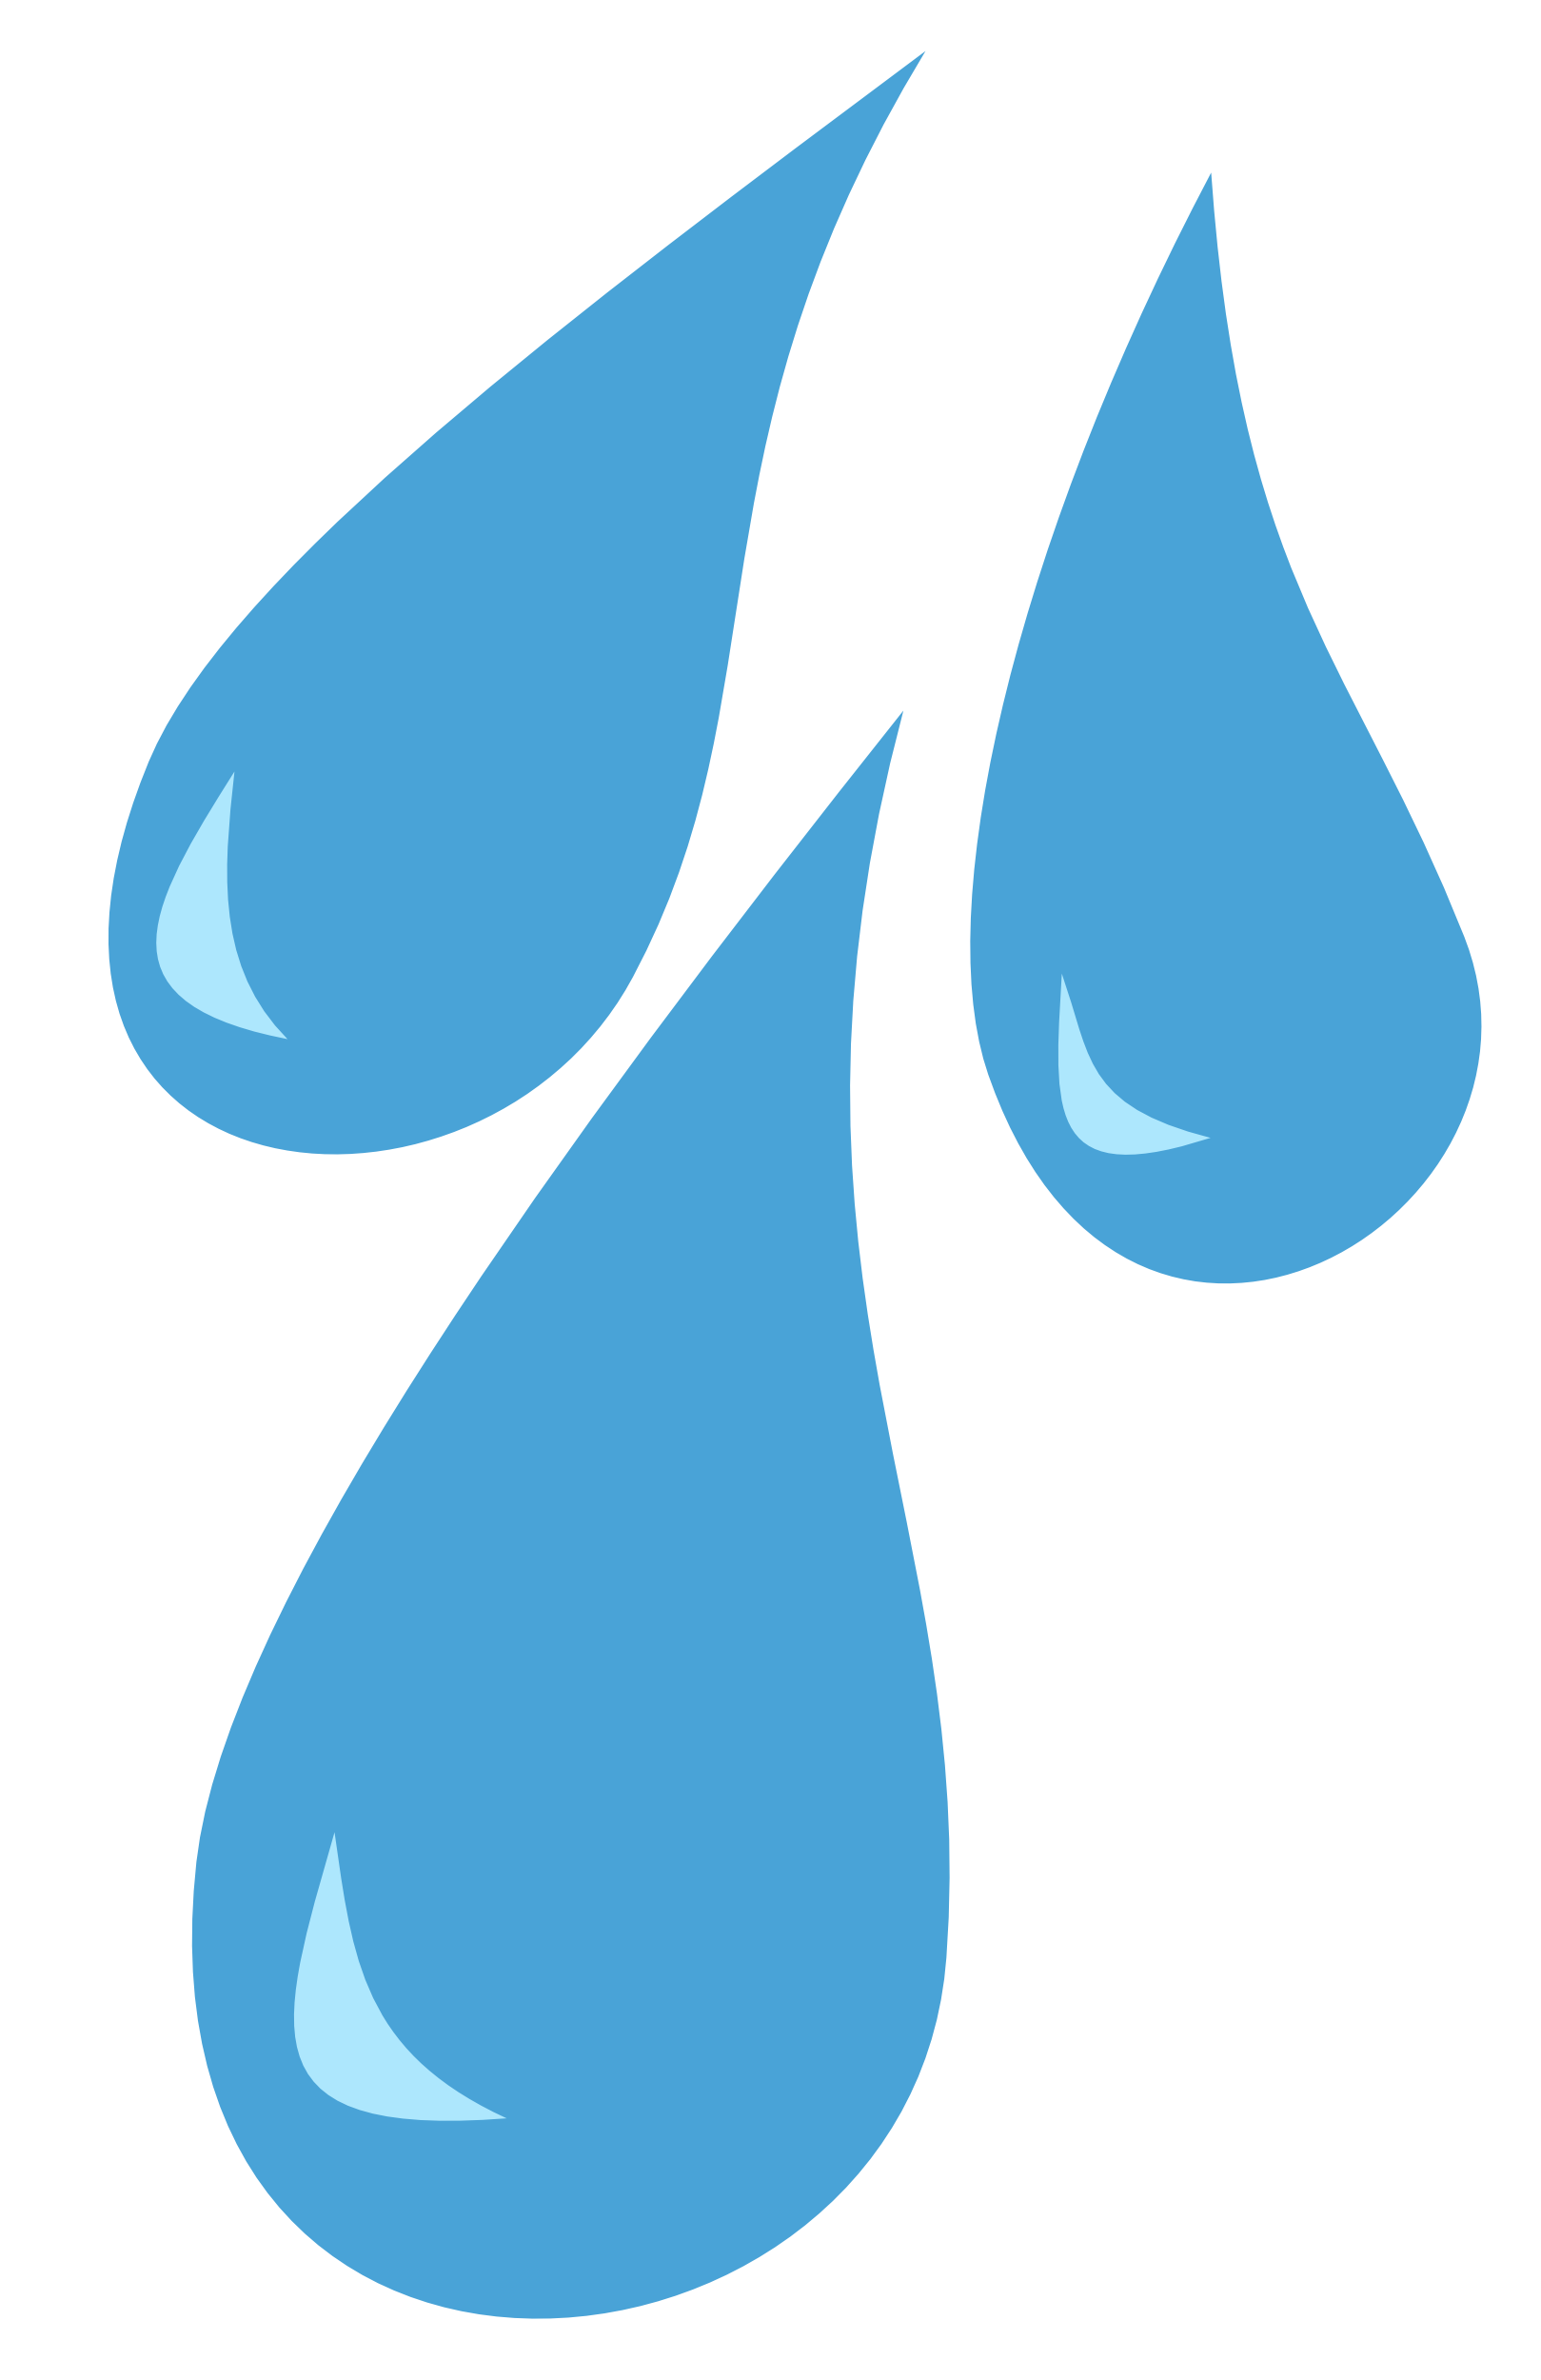 Raindrops Clipart - Gallery